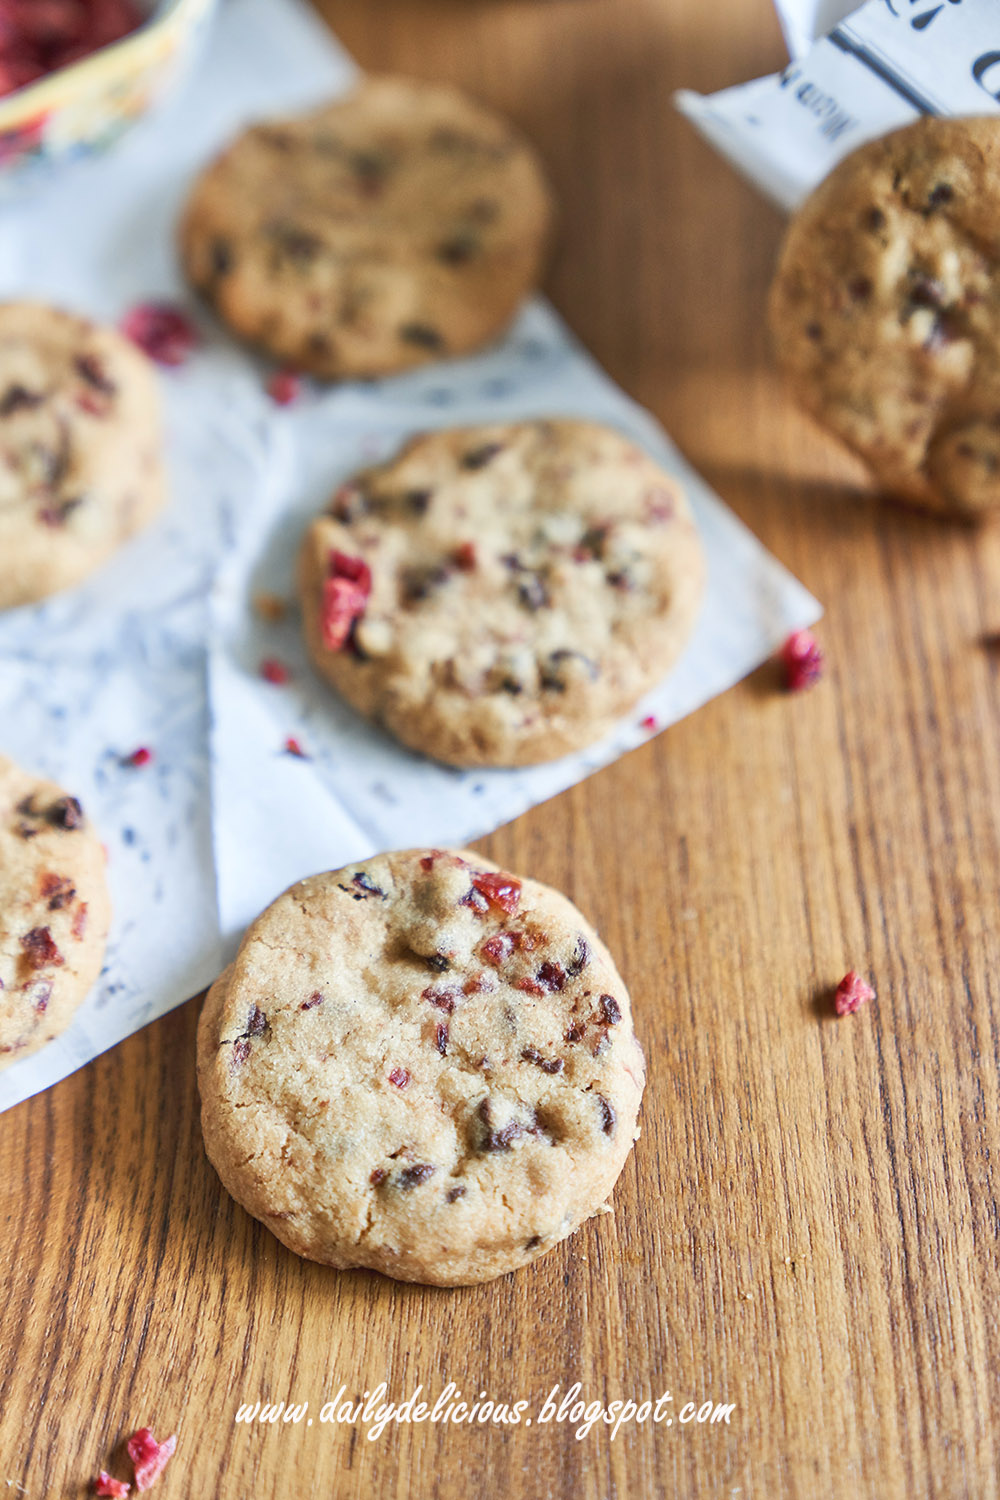 dailydelicious: Chocolate Cranberry Cookies